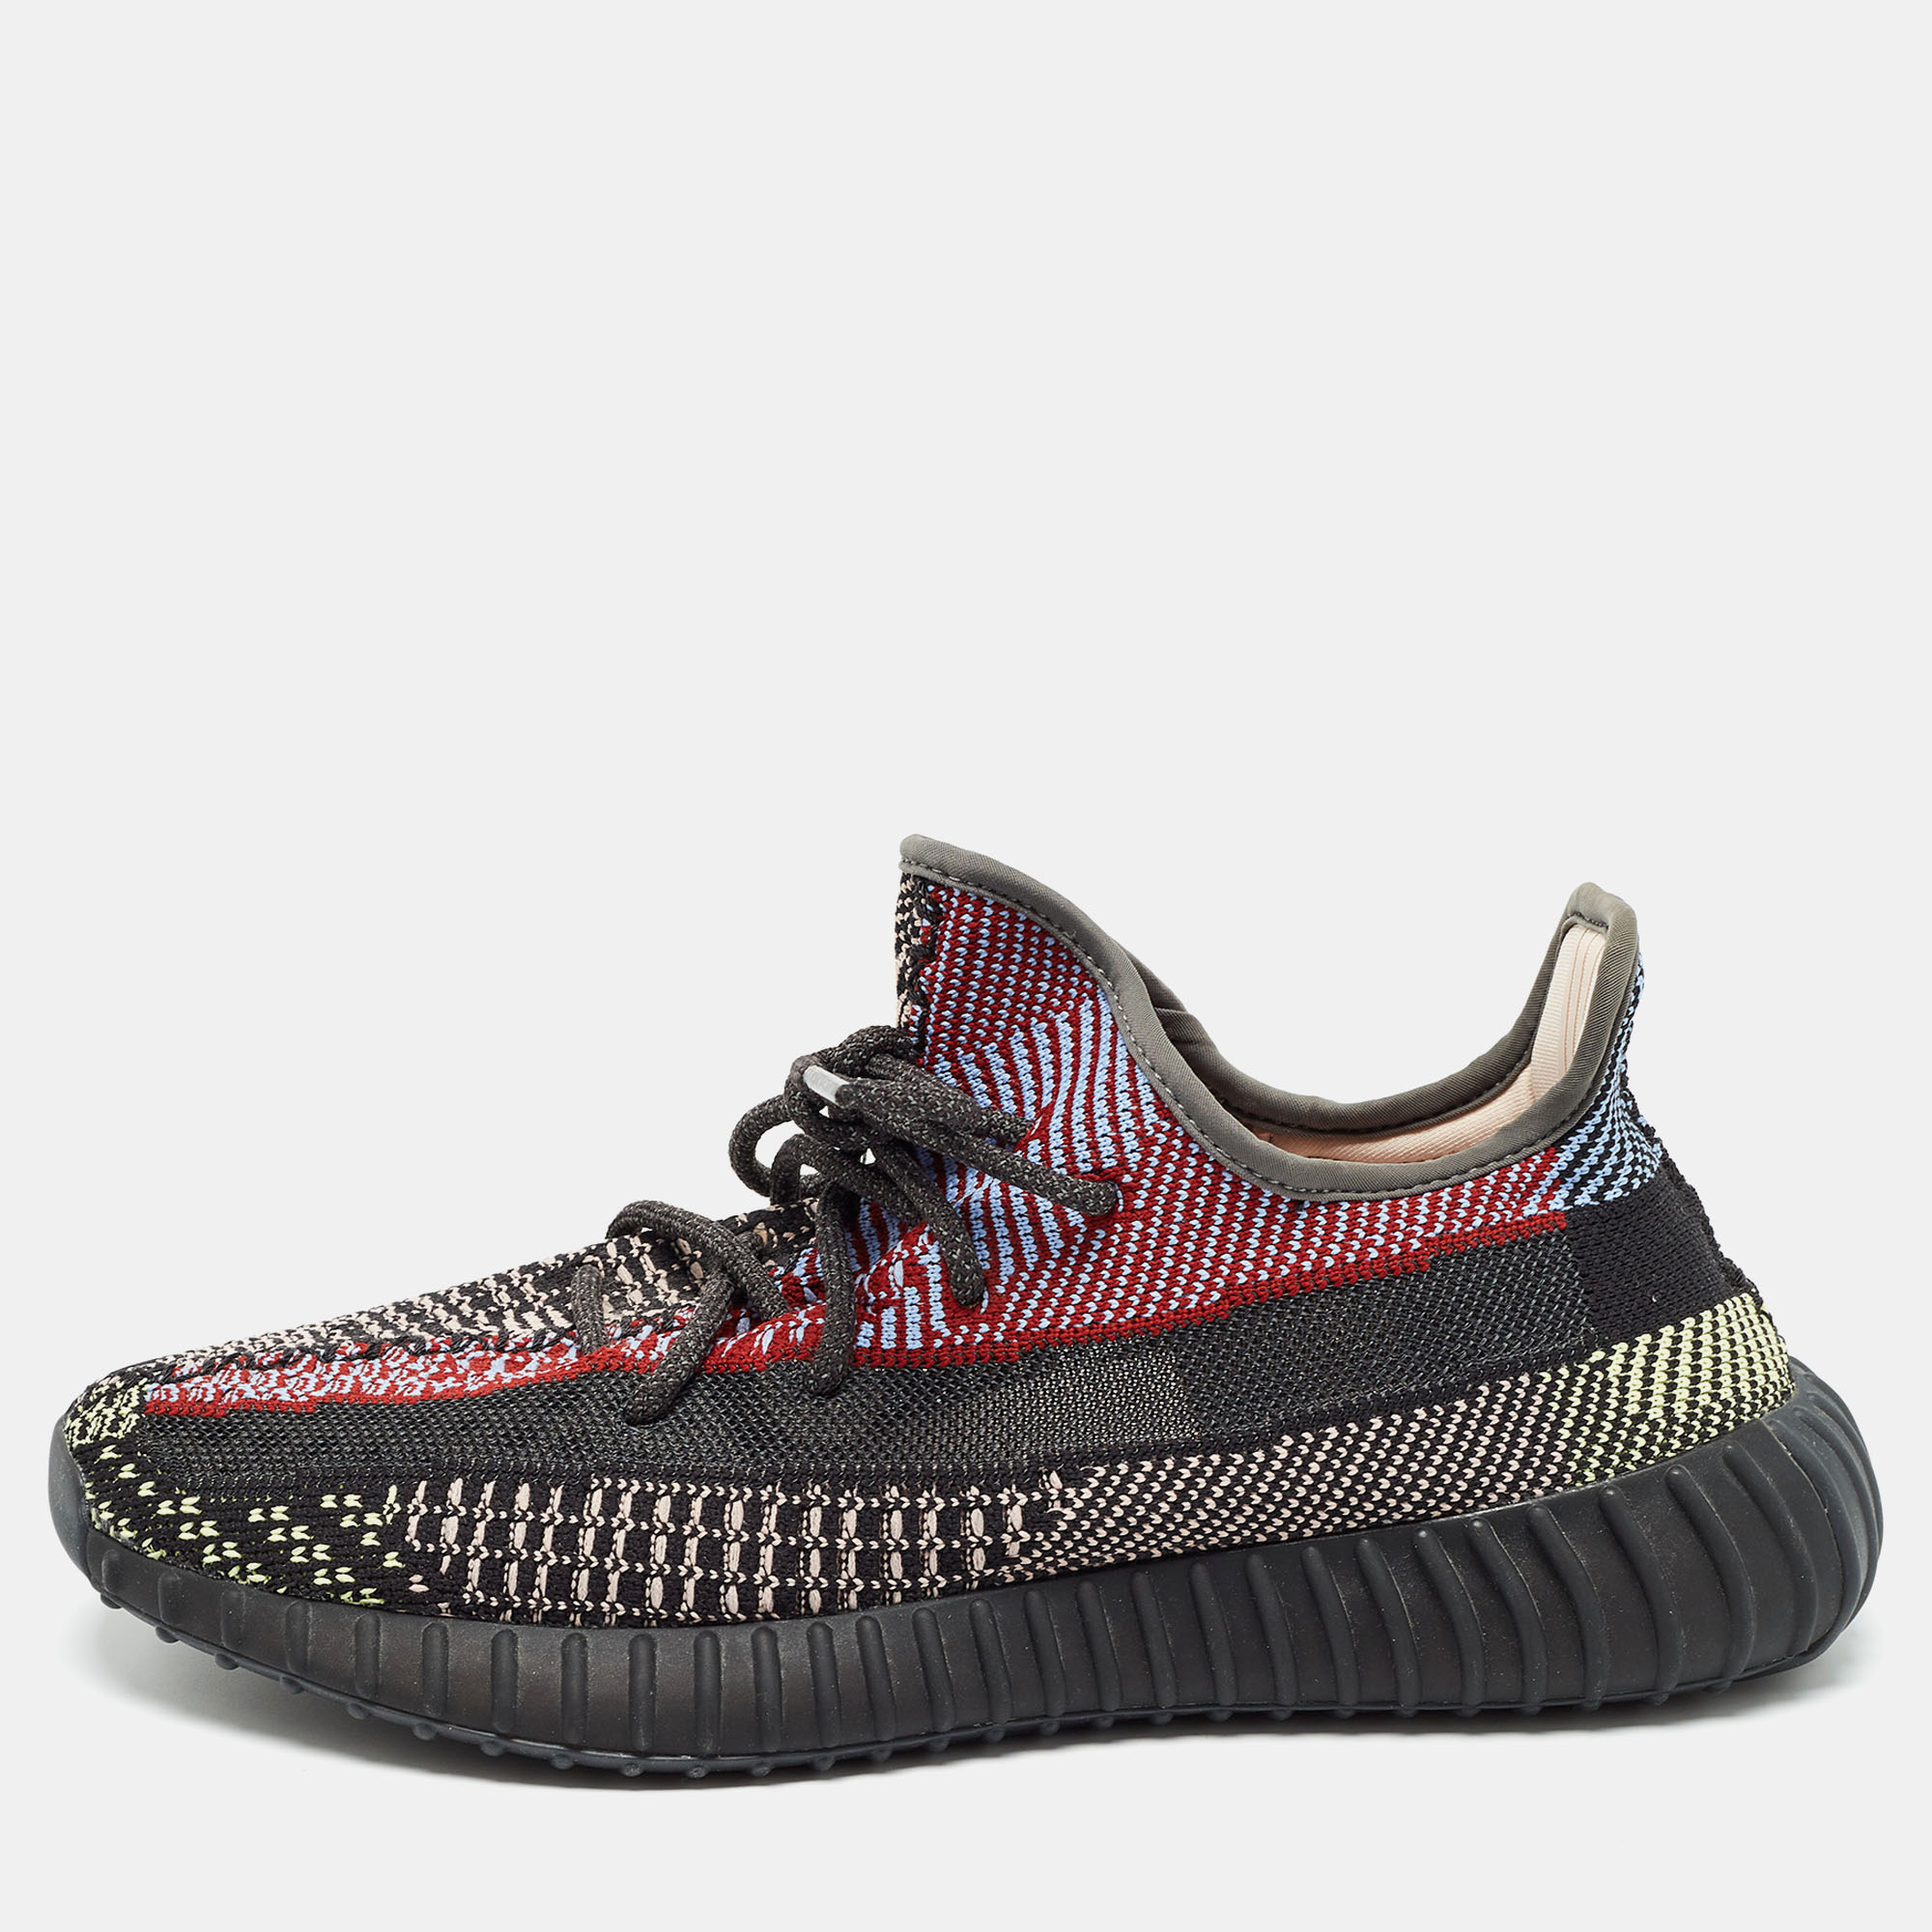 Pre-owned Yeezy X Adidas Multicolor Knit Fabric Boost 350 V2 Yecheil (non-reflective) Trainers Size 44